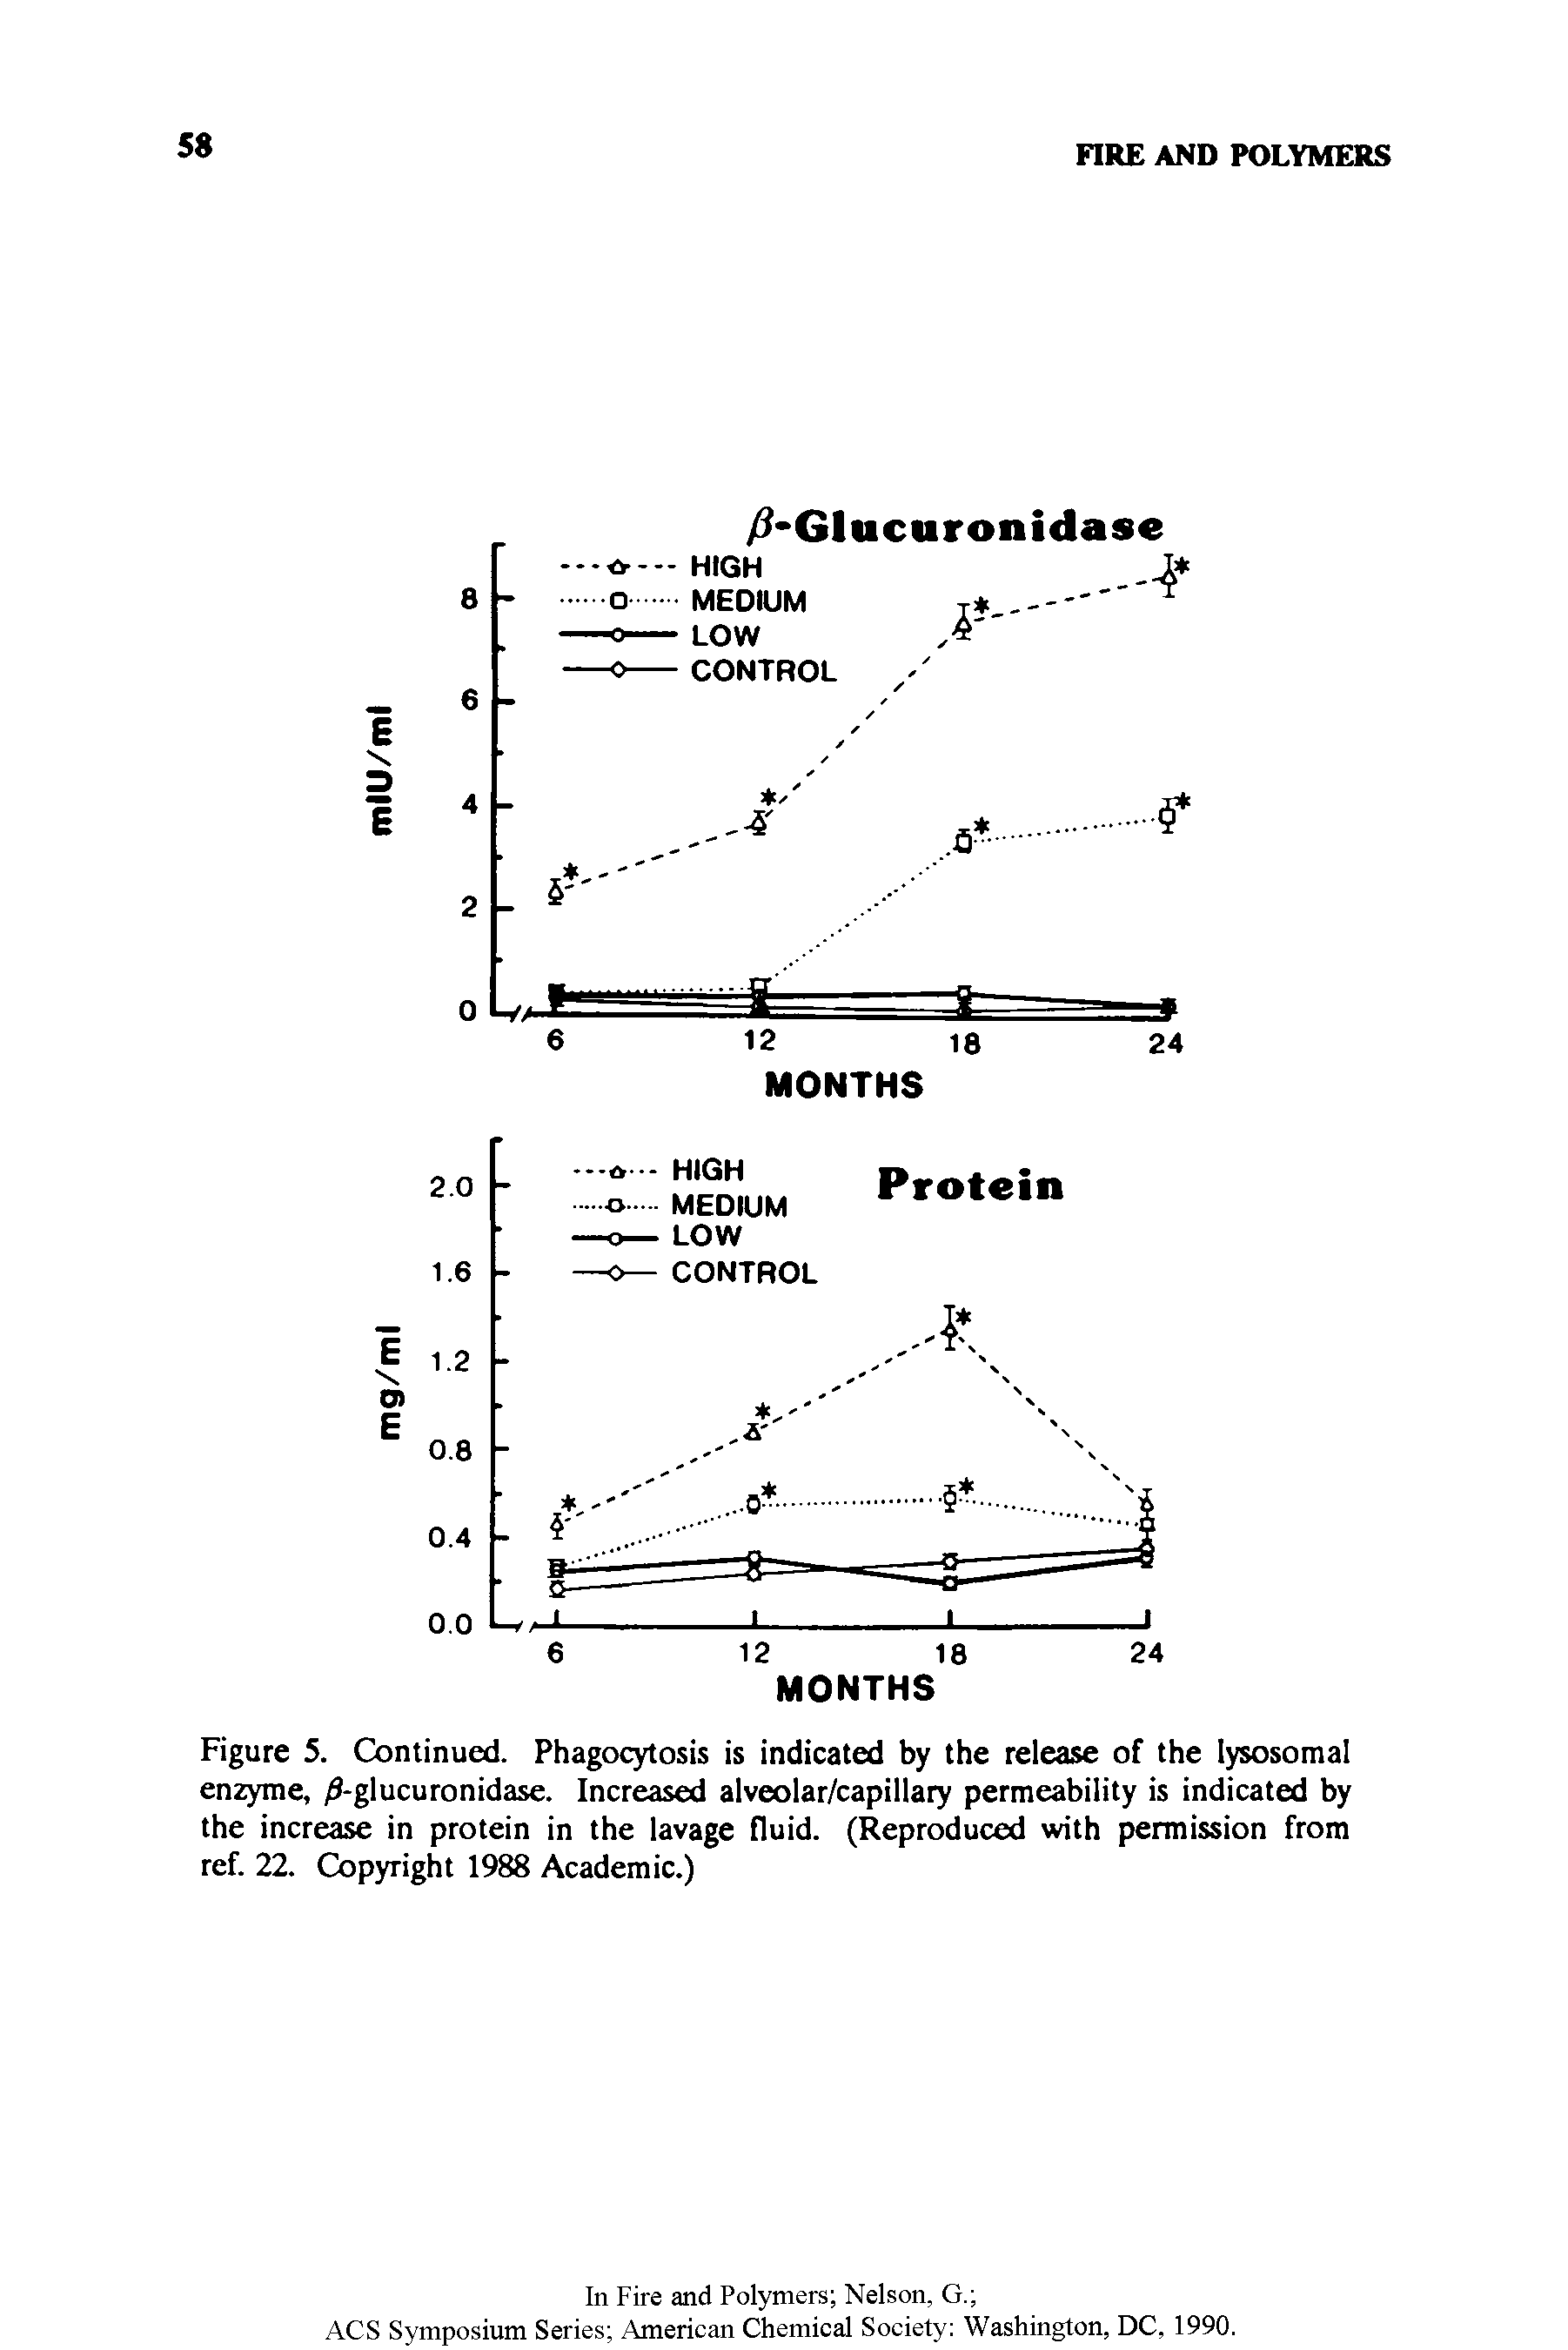 Figure 5. Continued. Phagocytosis is indicated by the release of the lysosomal enzyme, -glucuronidase. Increased alveolar/capillary permeability is indicated by the increase in protein in the lavage fluid. (Reproduced with permission from ref. 22. Copyright 1988 Academic.)...